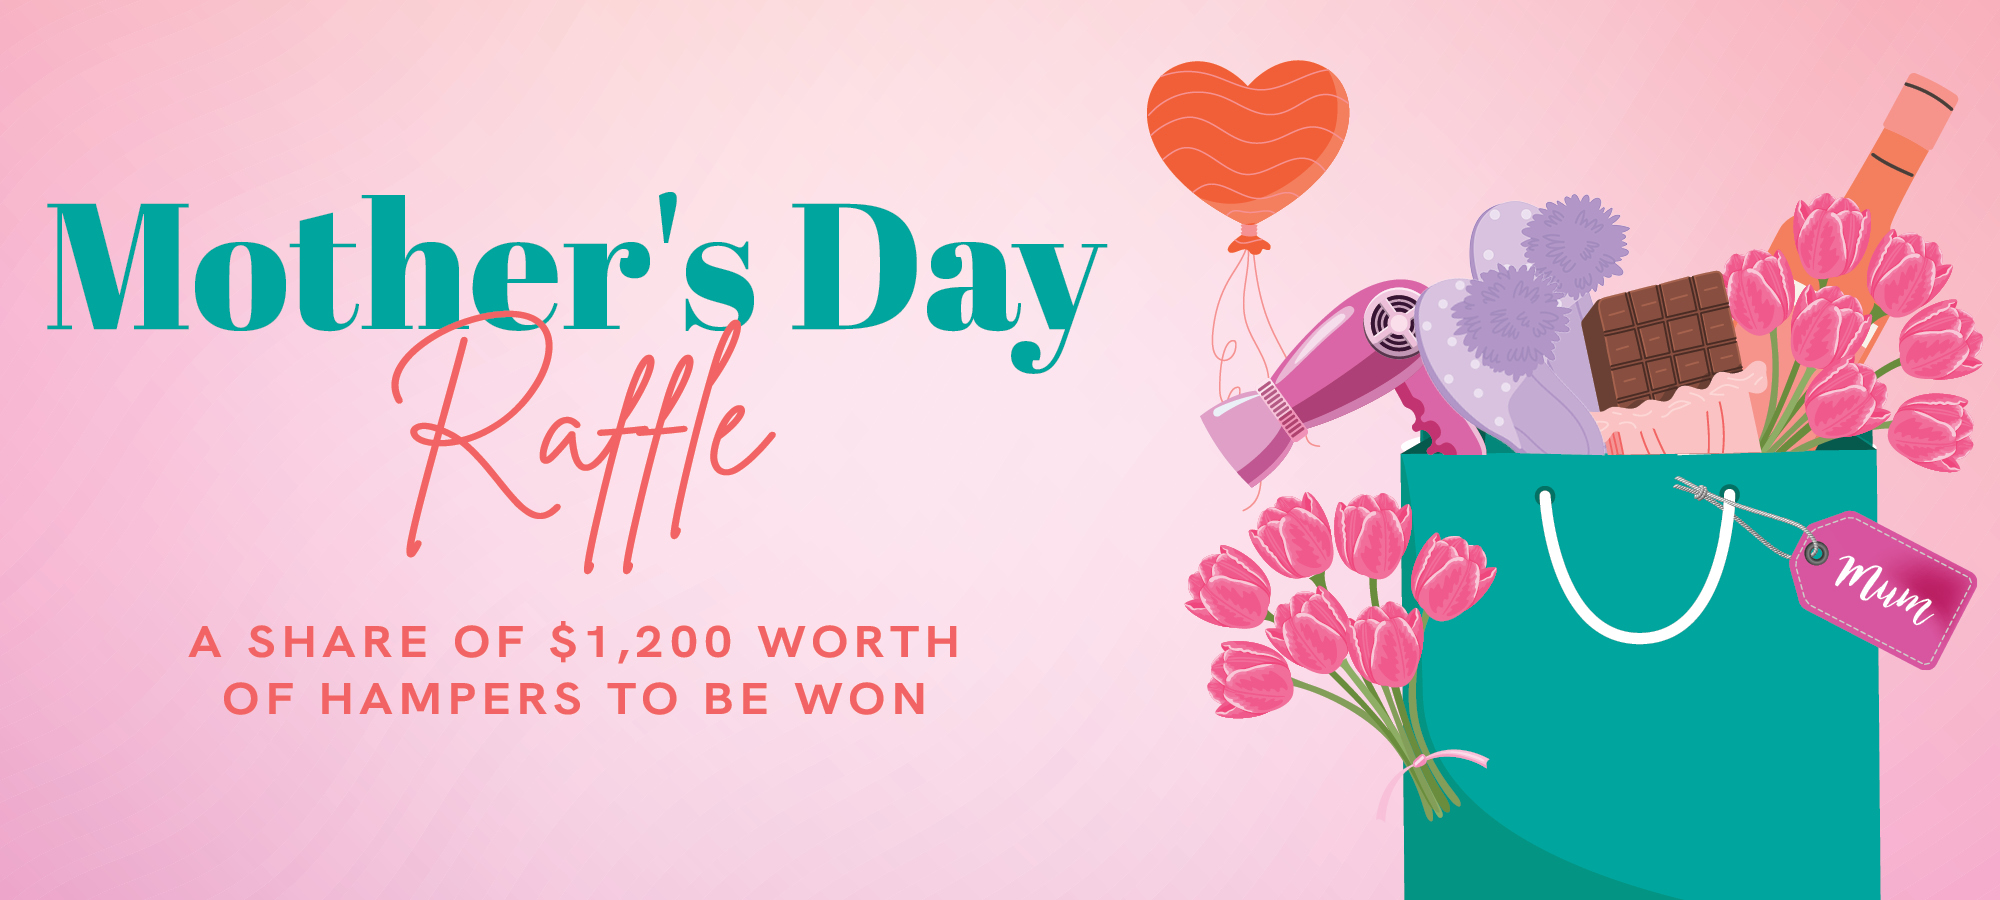 Mother’s Day Raffle